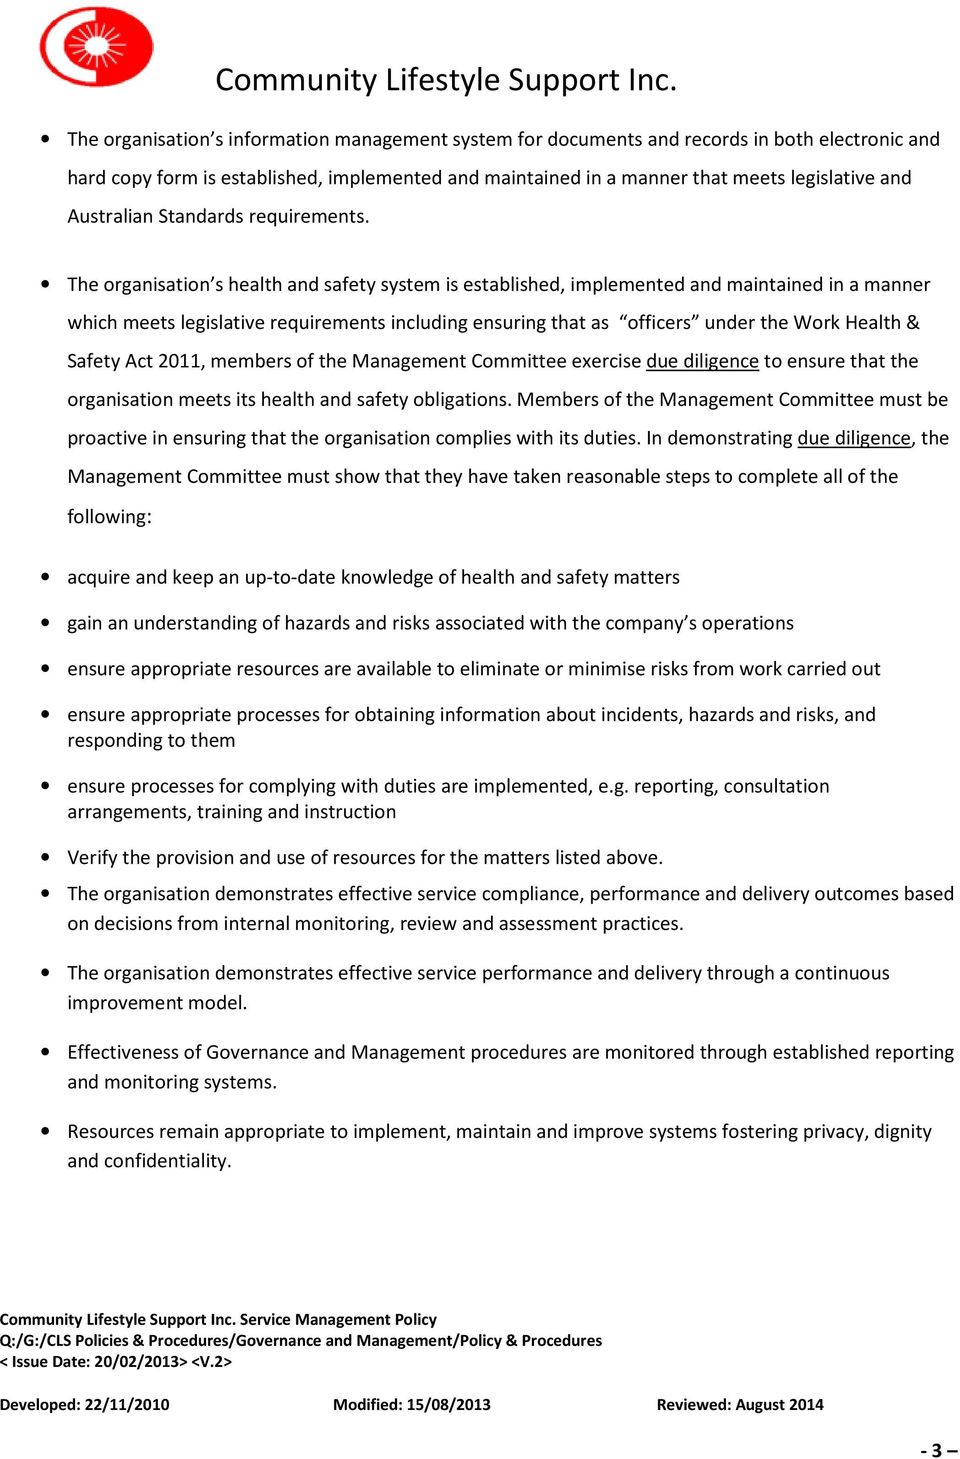 The organisation s health and safety system is established, implemented and maintained in a manner which meets legislative requirements including ensuring that as officers under the Work Health &